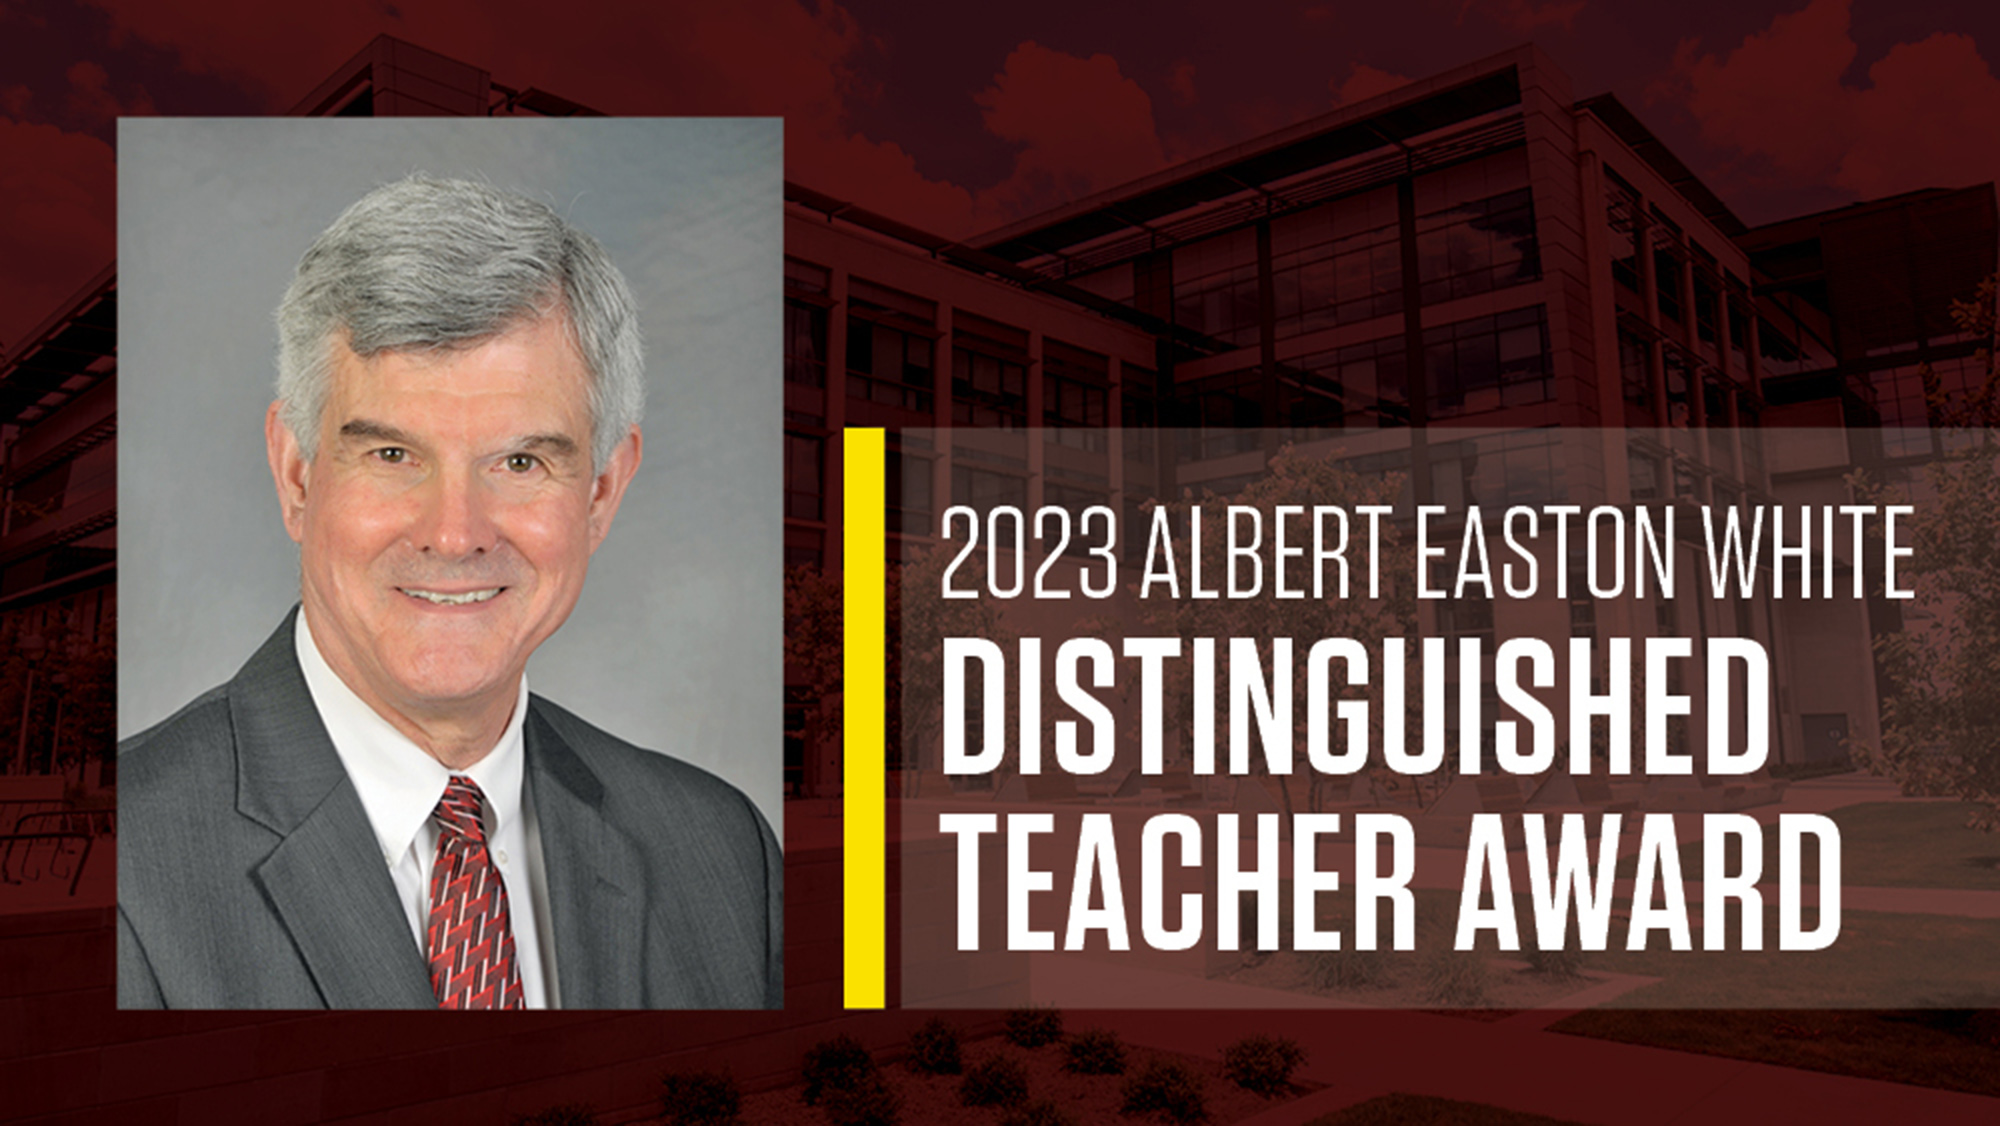 Headshot of Dr. George Pharr on graphic containing words "2023 Albert Easton White Distinguished Teacher Award."